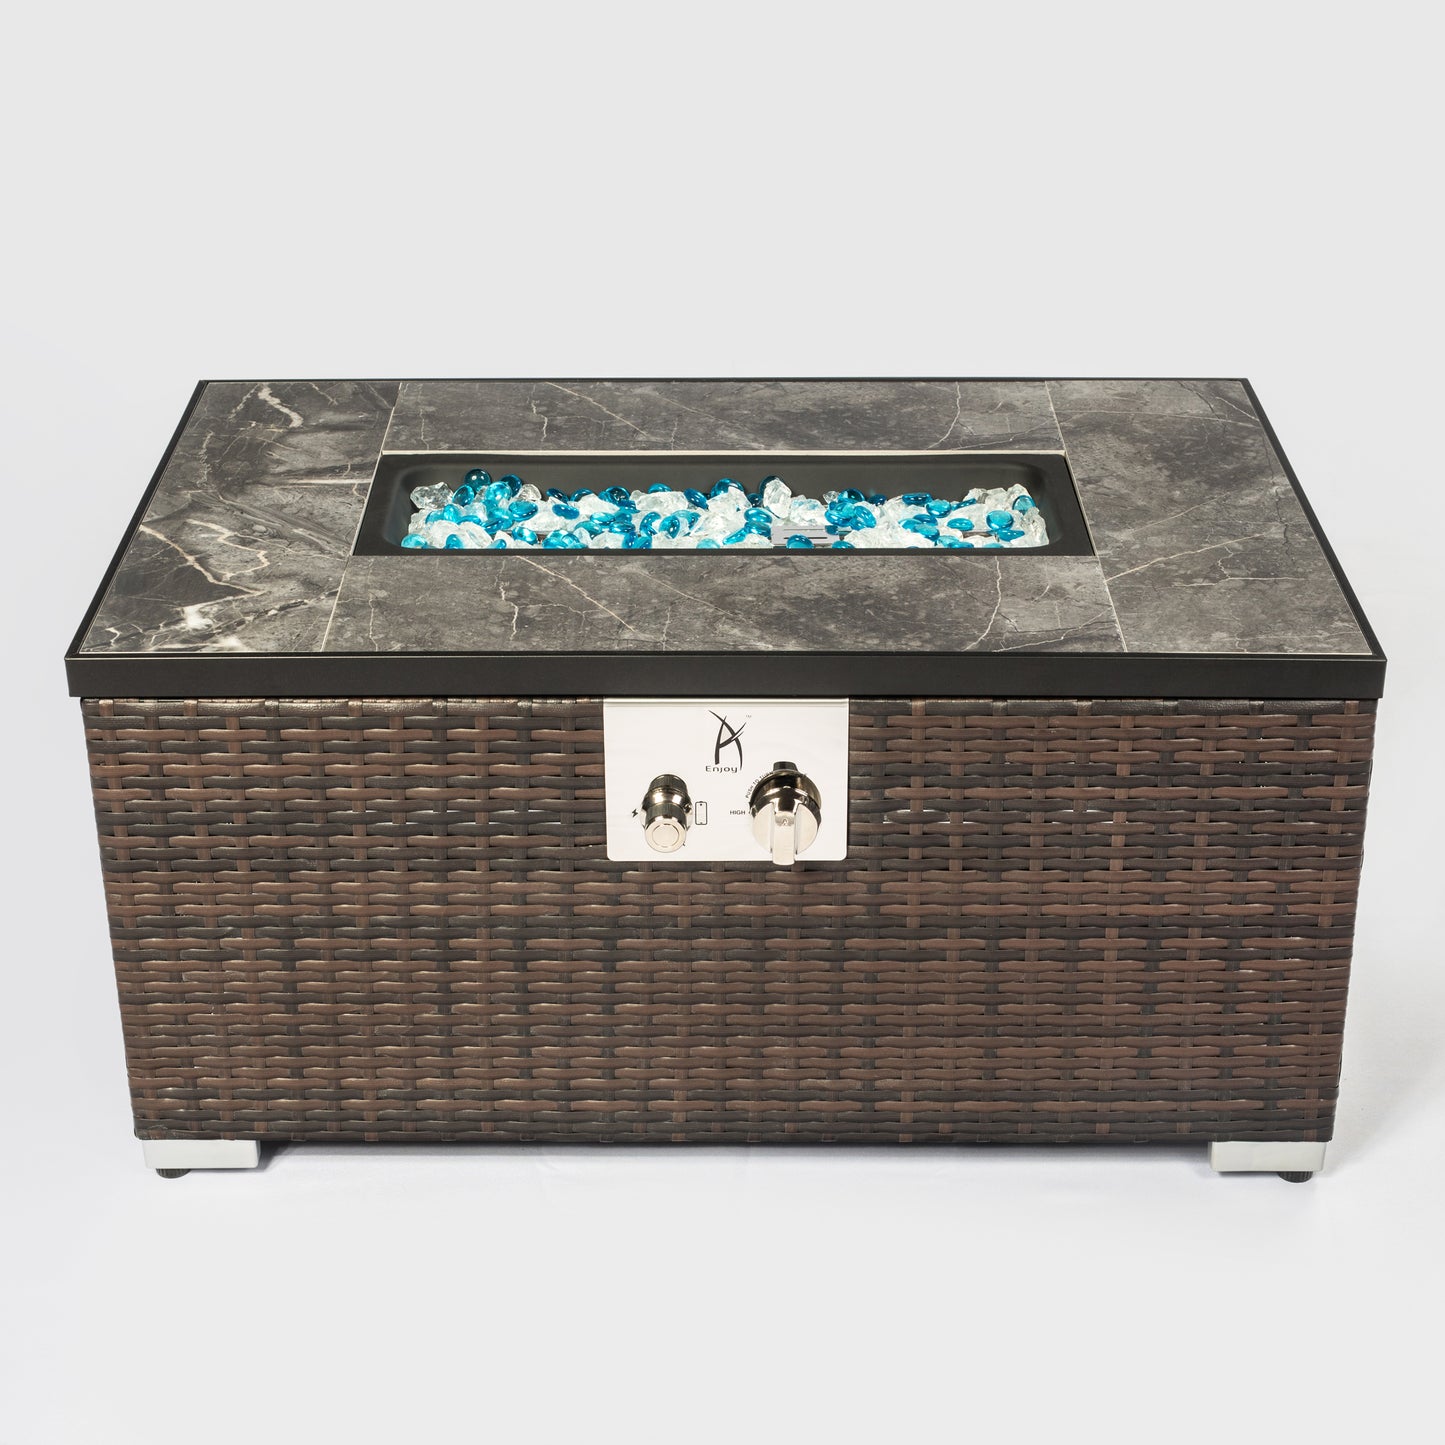 Rectangle Propane Fire Pit Table with Wicker Body and Ceramic Tile Top